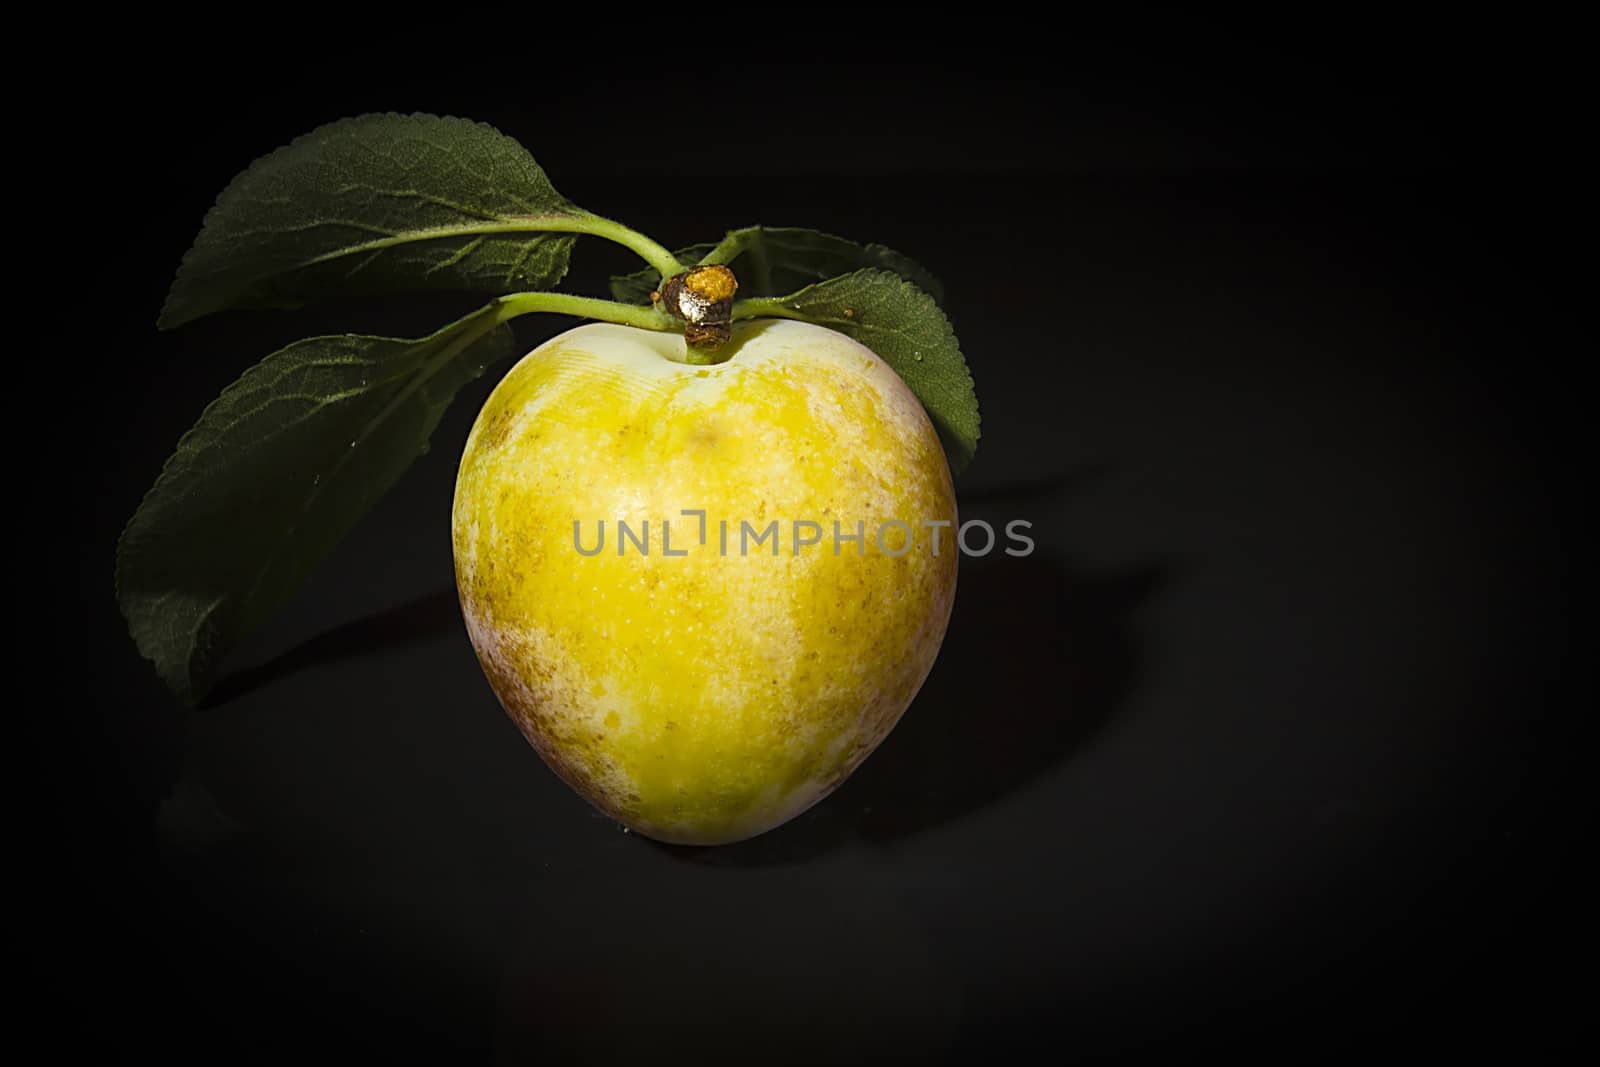 Ripe plums on a black reflective surface